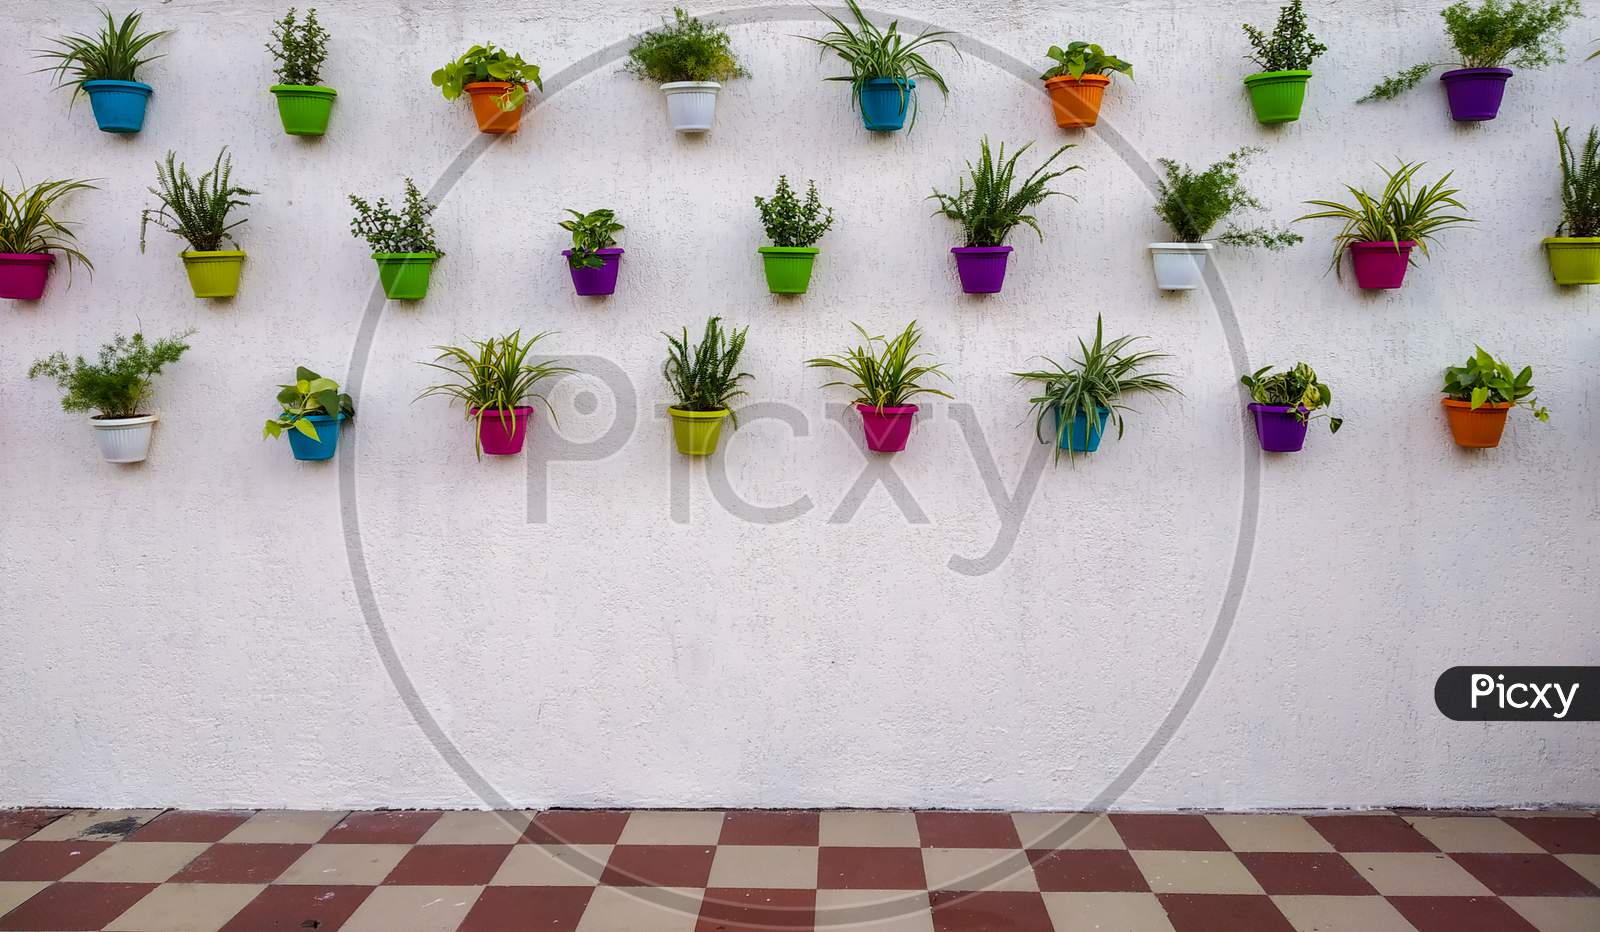 White Brick Wall With Colorful Plants And Pots Hanging On It With Space For Text.